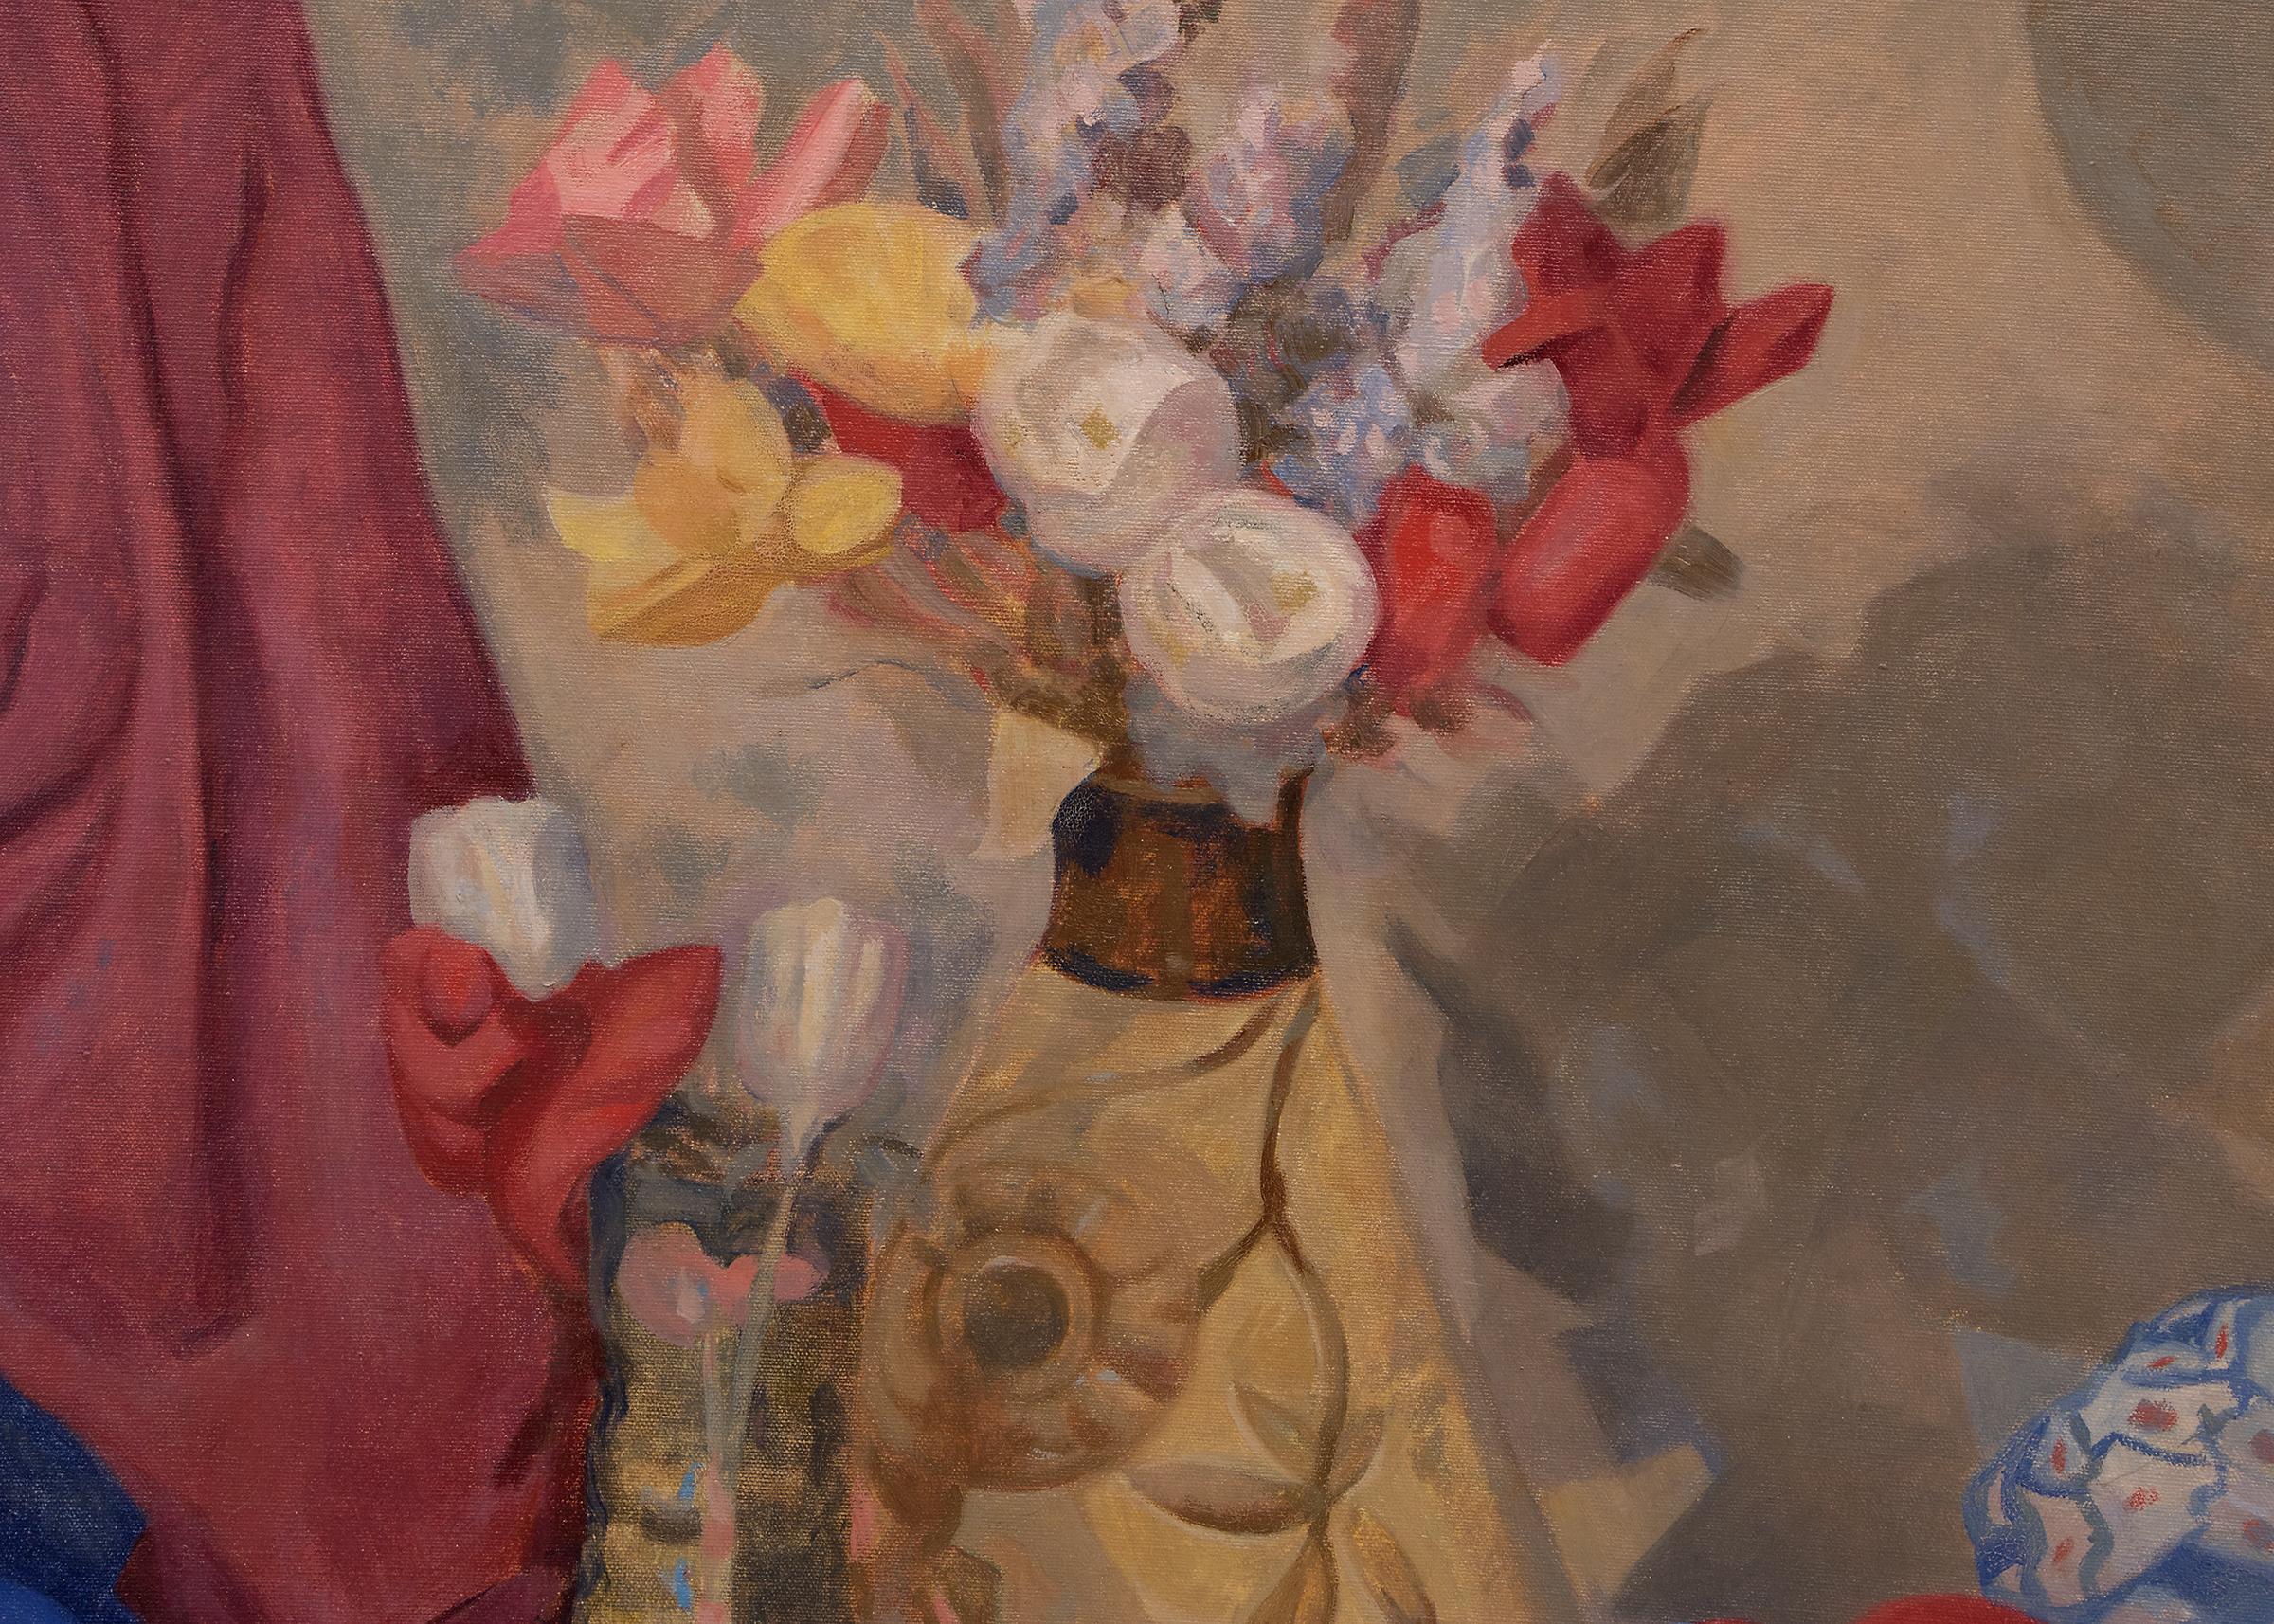 Original vintage 1945 oil painting with an interior still life with a vase of flowers, tea cup, and drapery by 20th century Colorado modernist, John E. Thompson (1882-1945). Oil on canvas, colors include red, blue, gold, purple, pink and yellow.